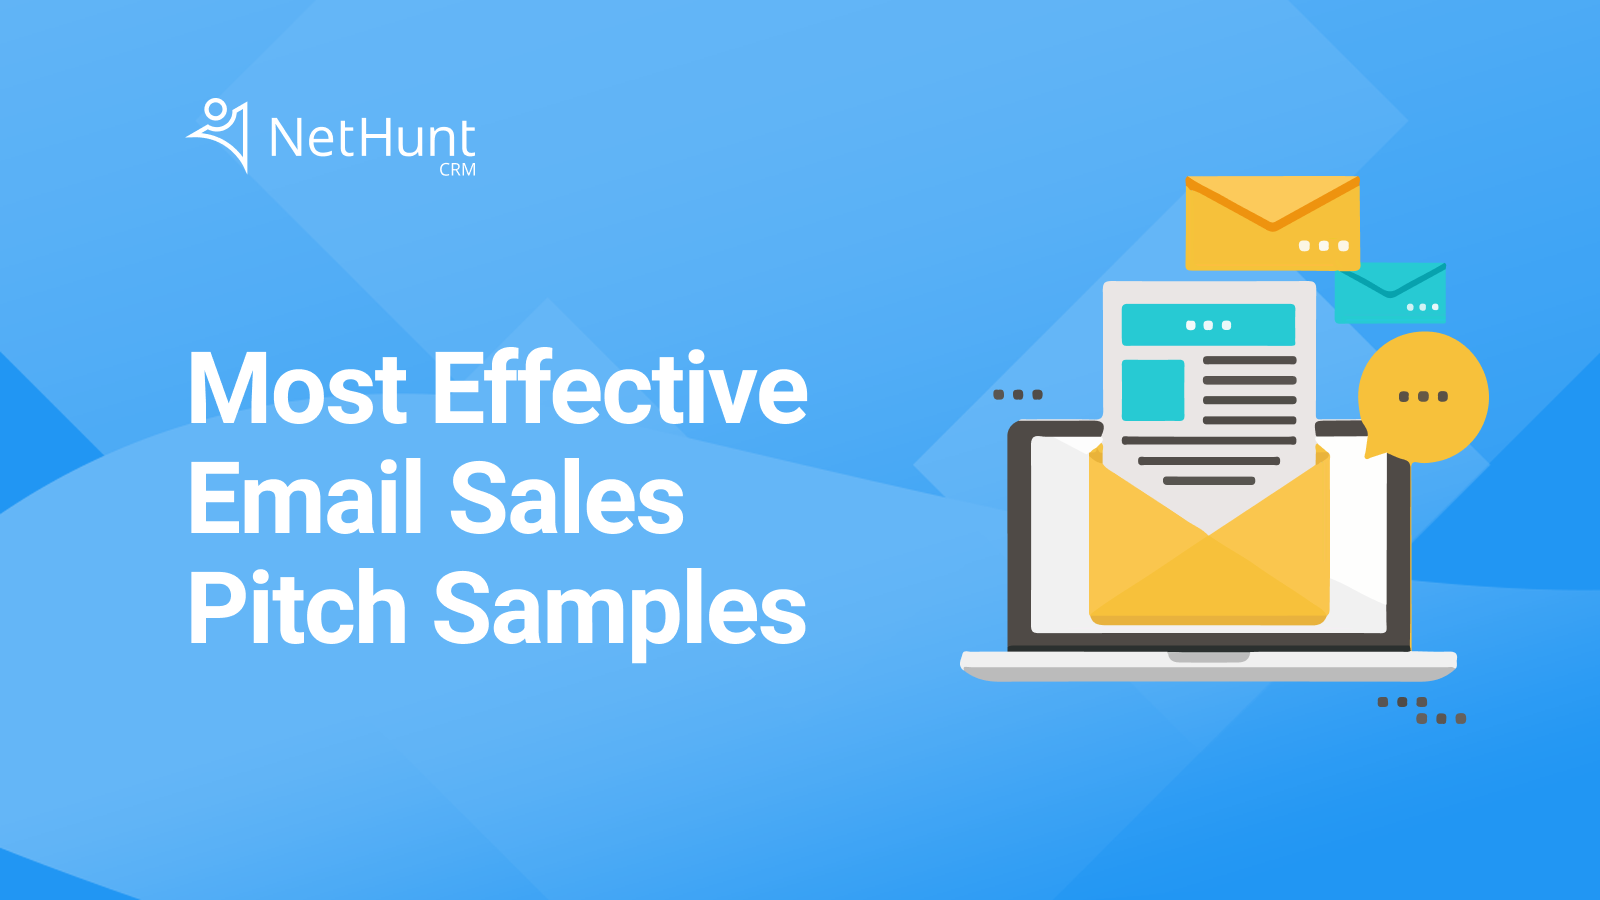 Most Effective Email Sales Pitch Samples | NetHunt CRM